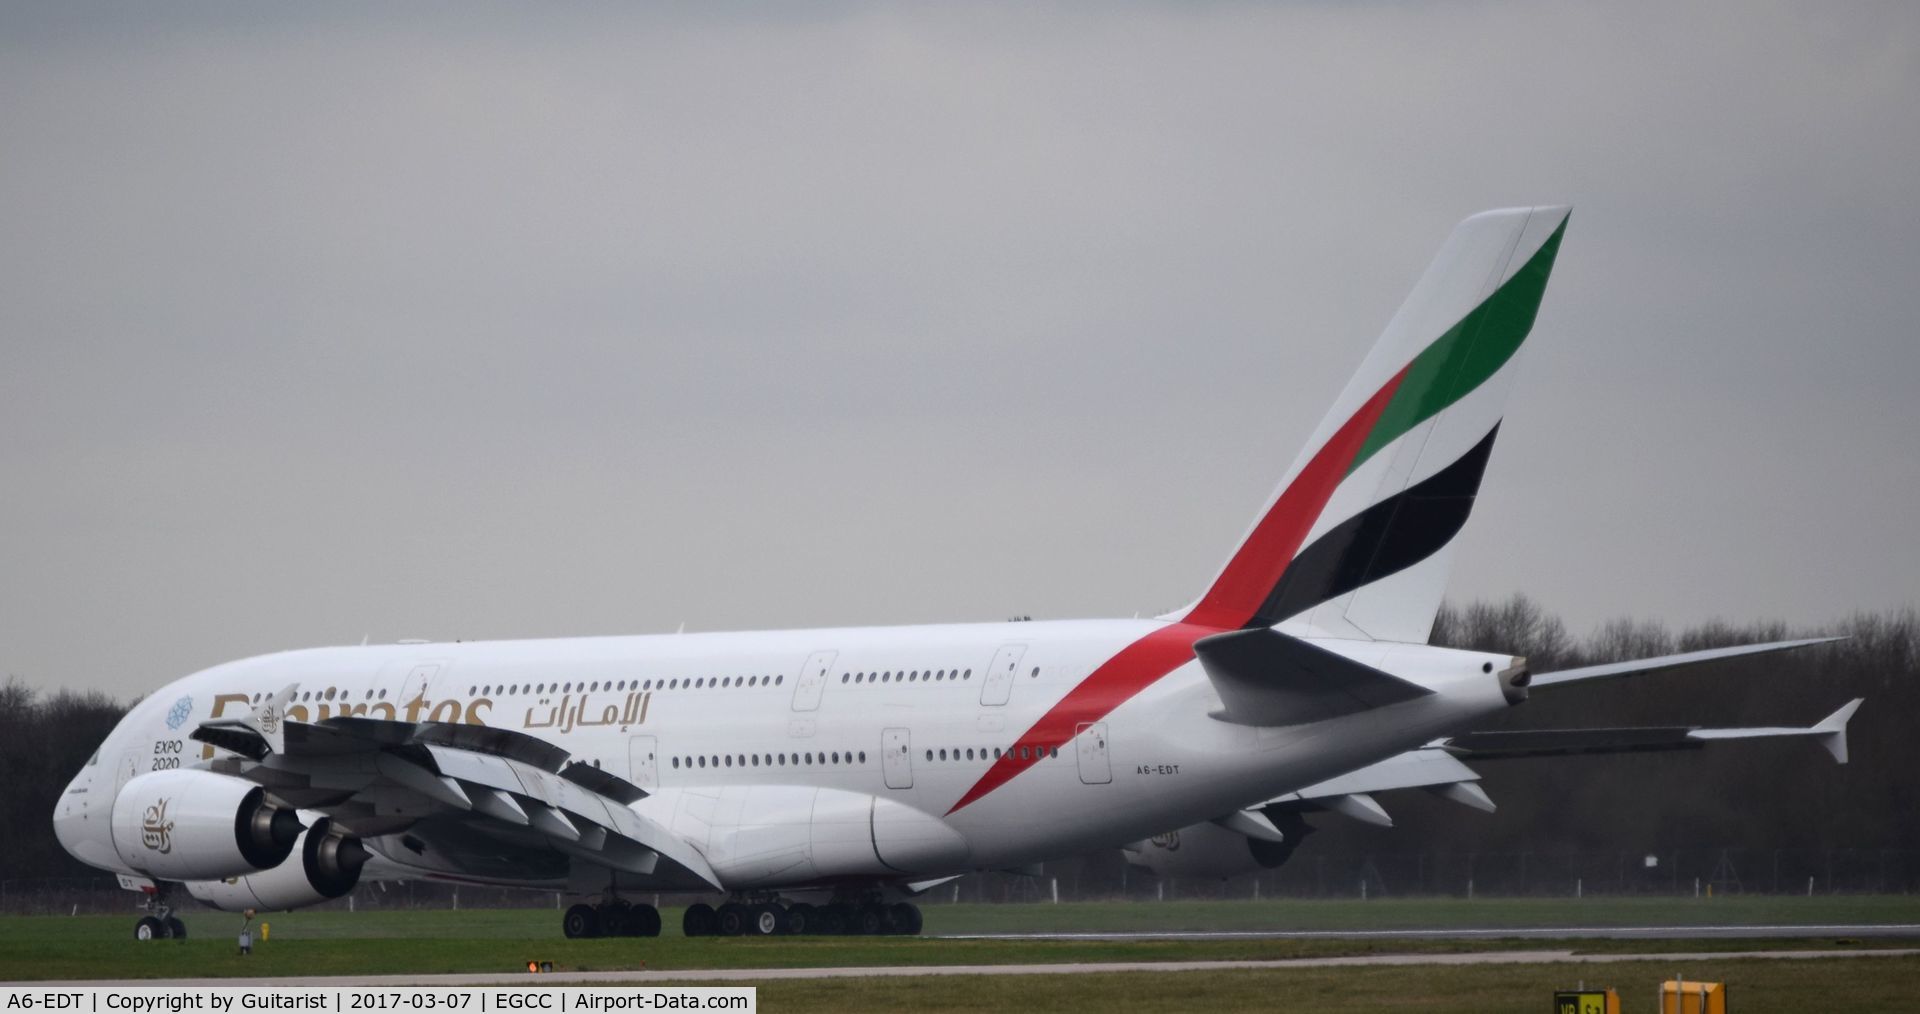 A6-EDT, 2011 Airbus A380-861 C/N 090, At Manchester